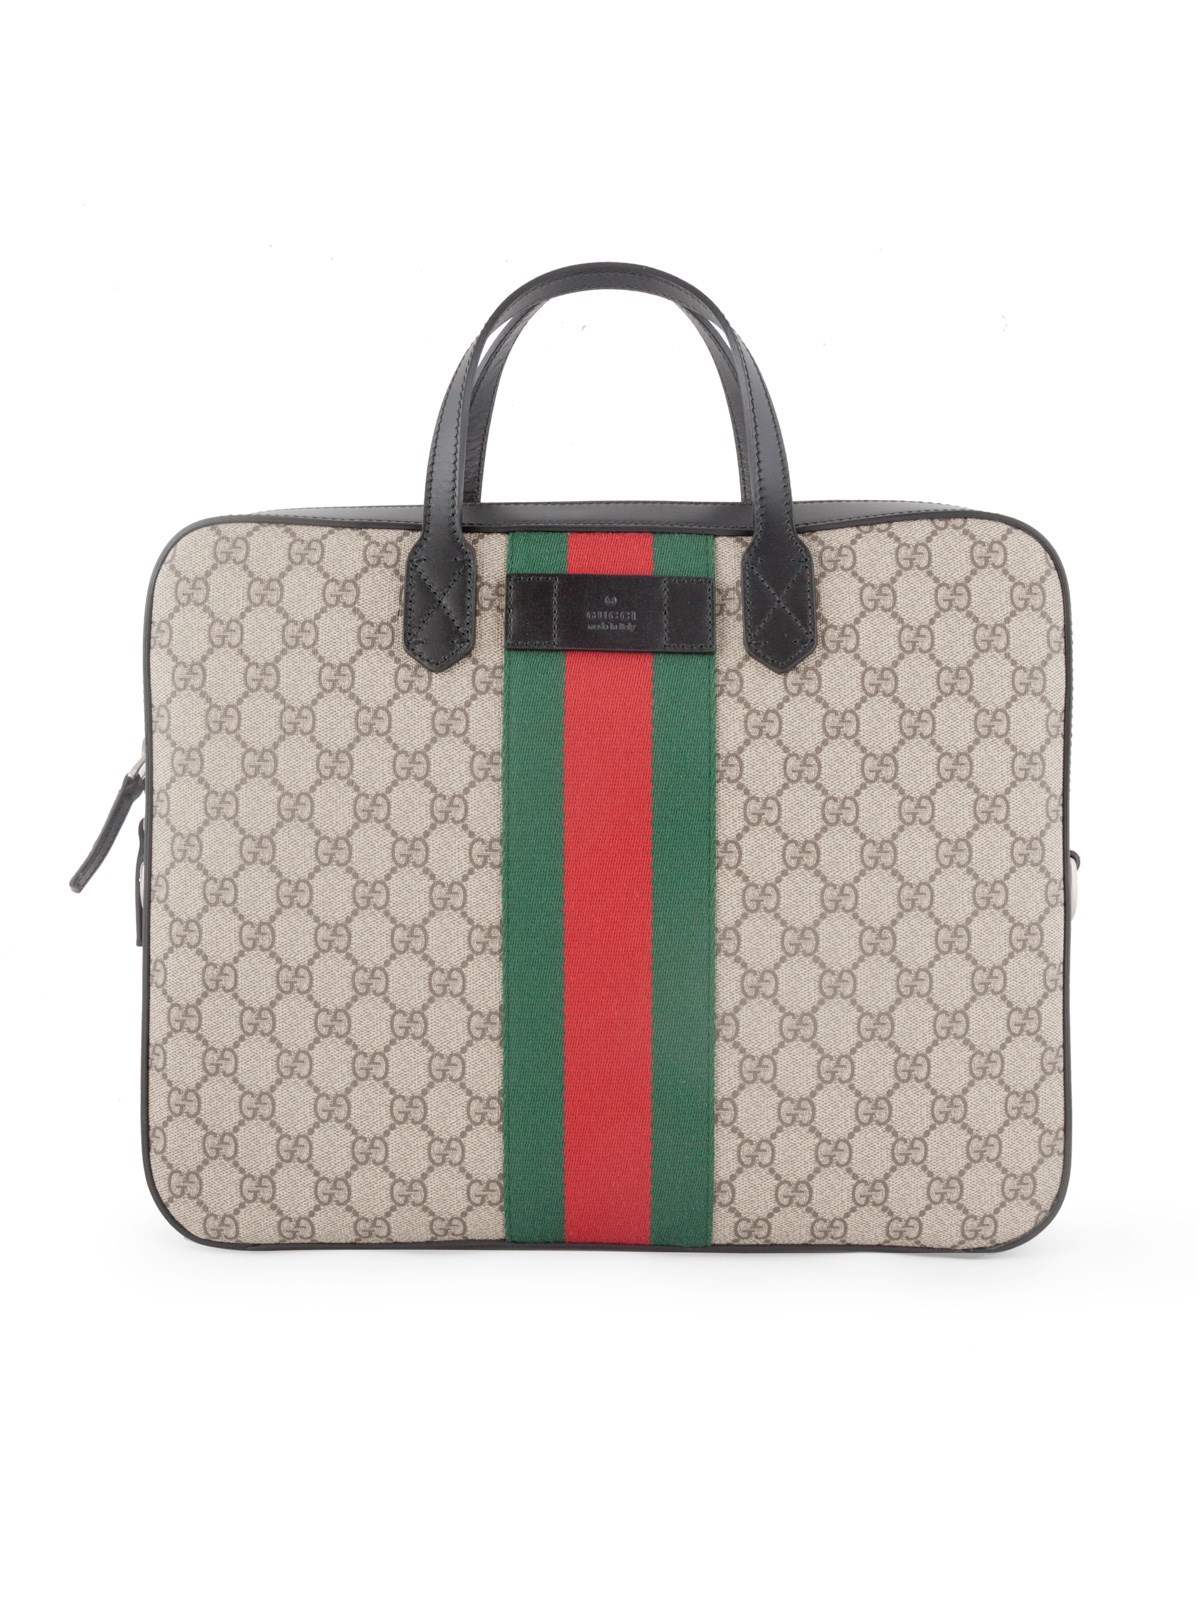 gucci WEB GG LAPTOP BAG available on 